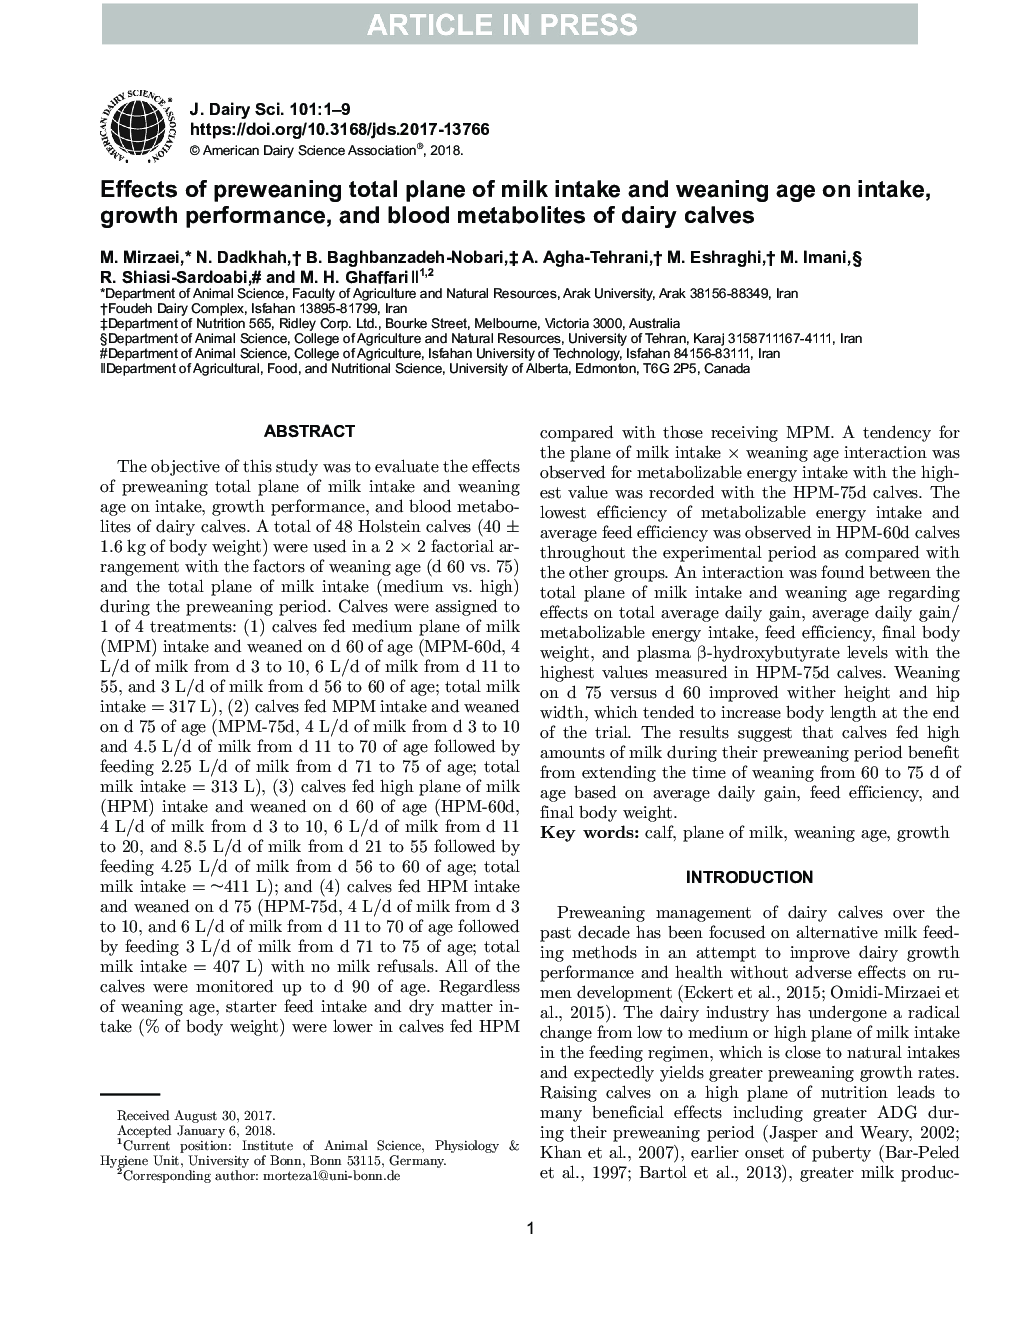 Effects of preweaning total plane of milk intake and weaning age on intake, growth performance, and blood metabolites of dairy calves